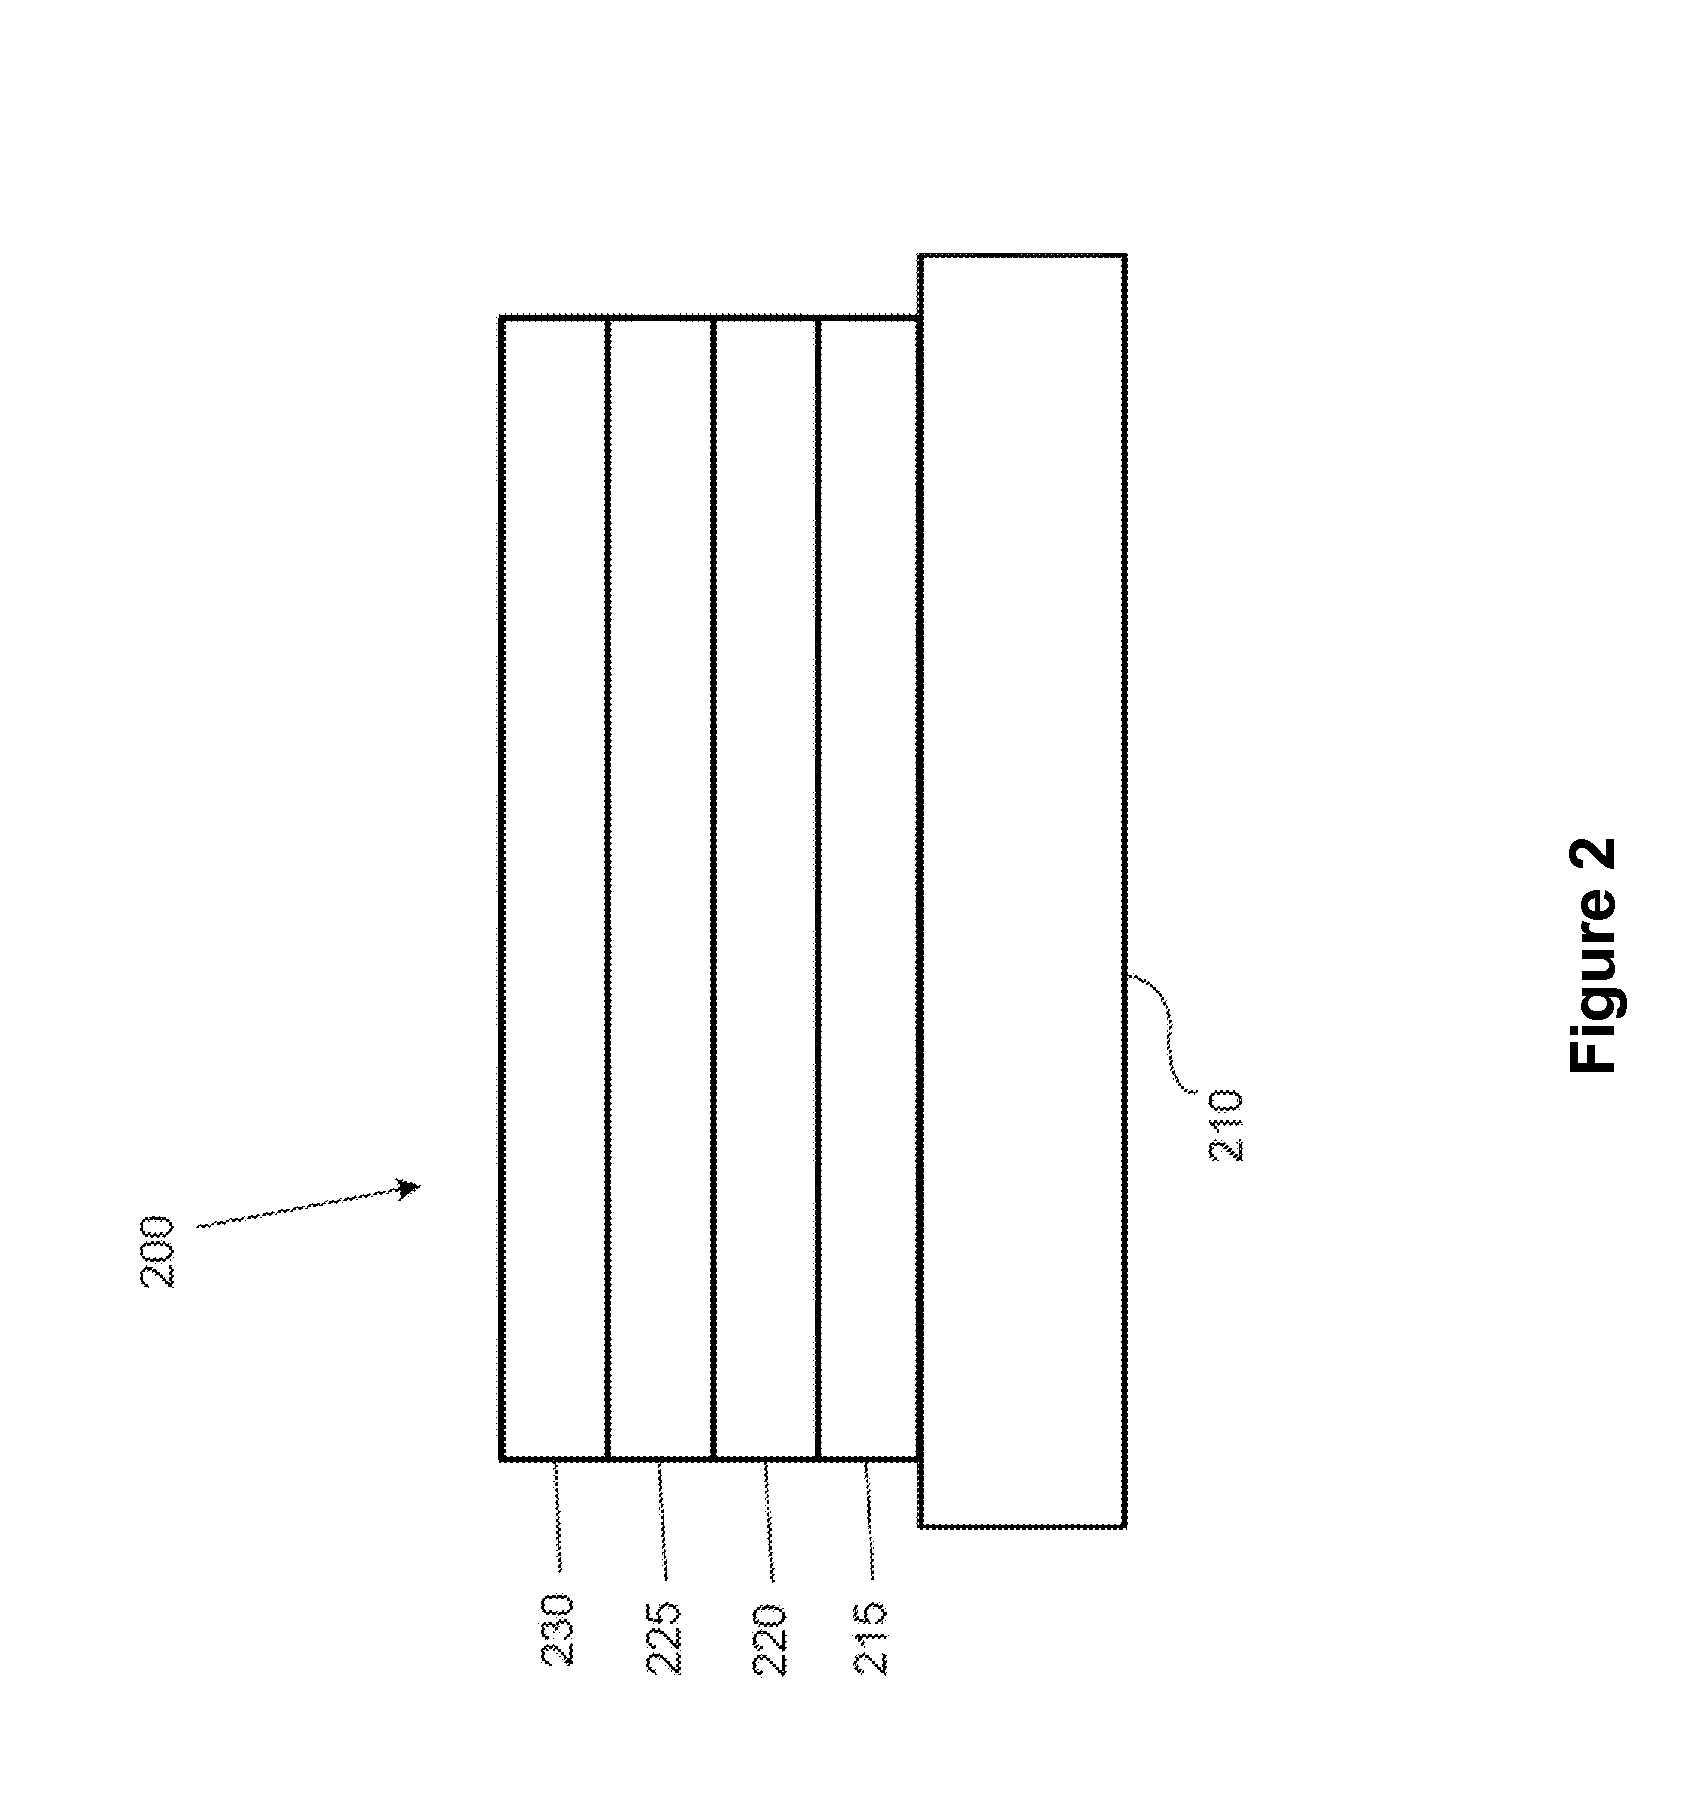 Novel compounds and uses in devices